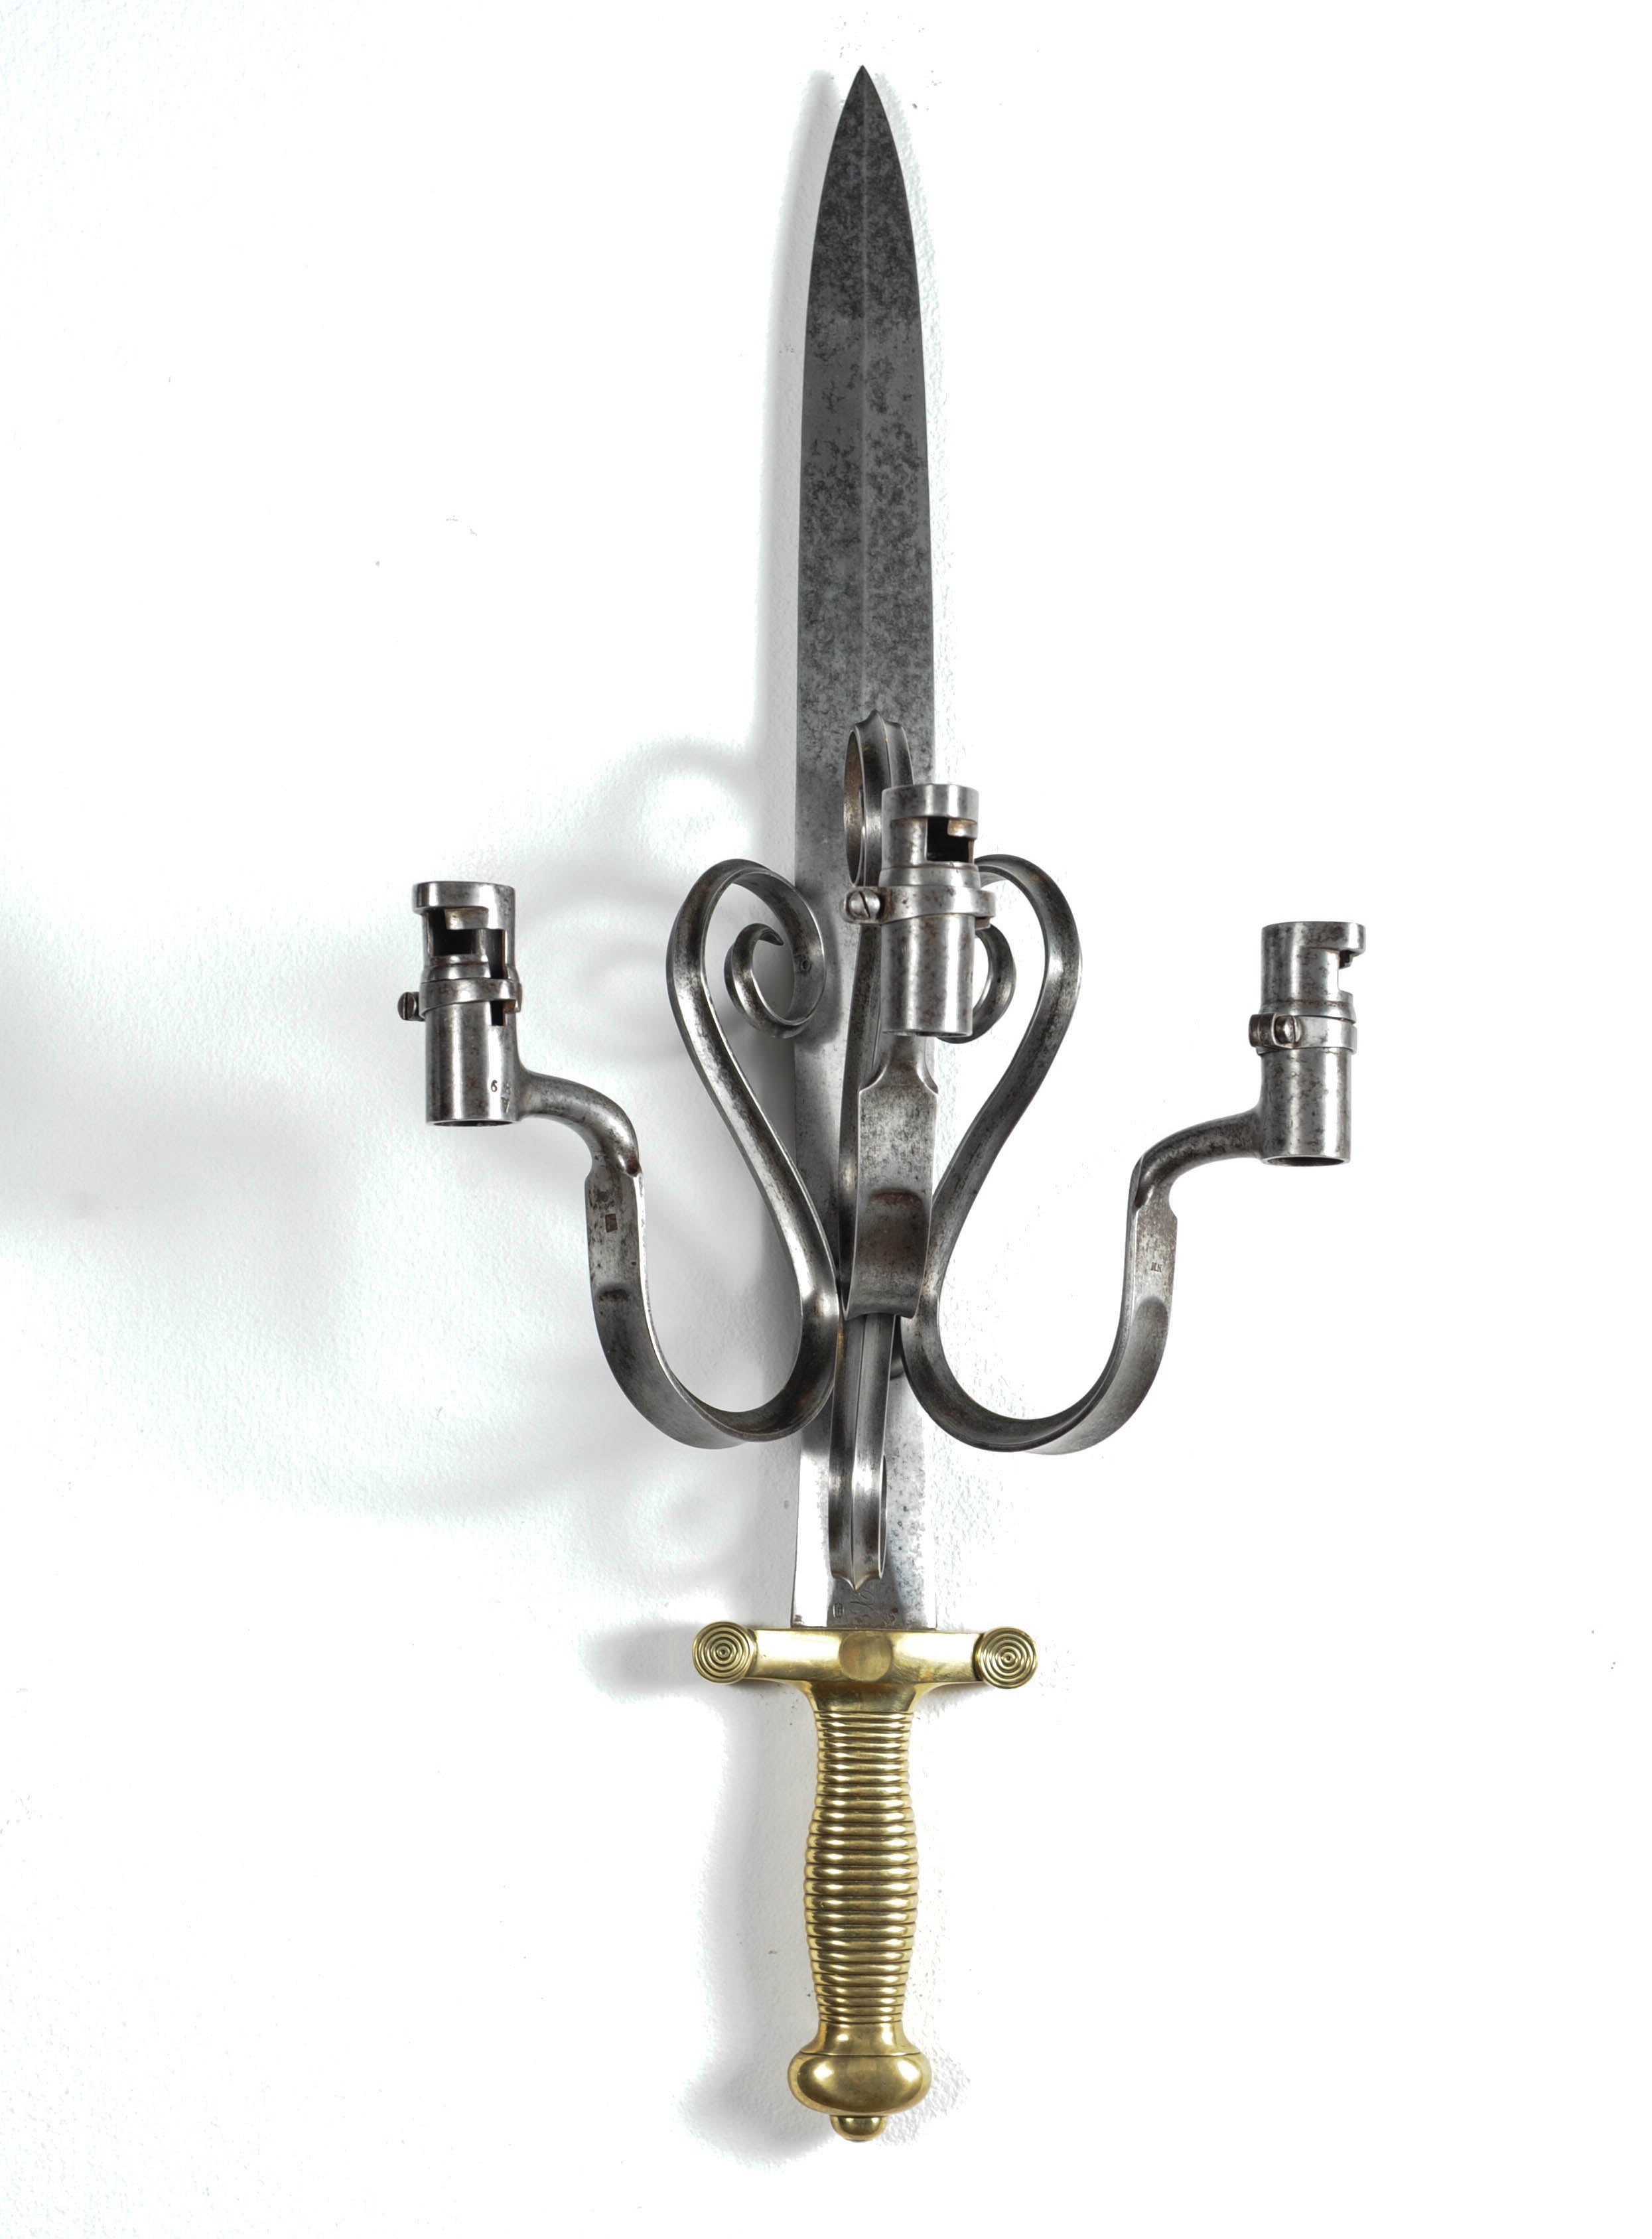 Pair of Appliques/Candle Sconces Made of Antique Swords and Bayonets